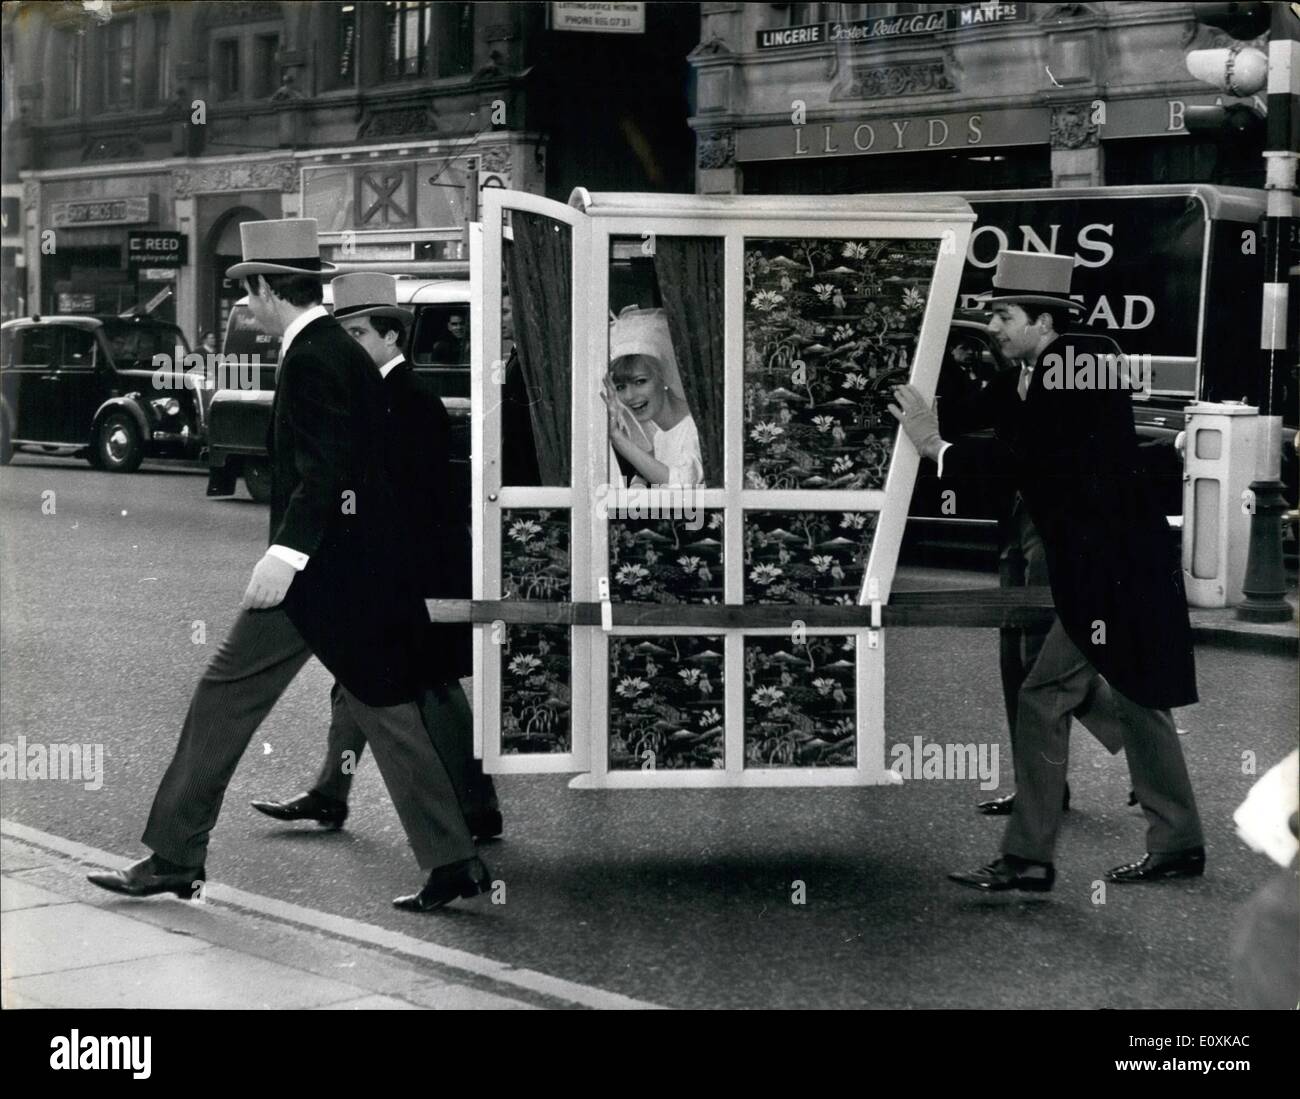 Mar. 03, 1967 - Getting to the Church - by Sedan: A bride in a four-manned Sedan chair versus a 210-horses power car, set off for St. Ann's Church in Wardour Street, from Young's Dress Hire, 178, Wardour Street, W.1. this morning - to prove that in congested towns, man power beats motor power at getting the bride to Church on time. Especially at Easter, Bridal hire specialist Louis Young thinks the return of the sedan chair could be a pretty and practical idea for brides Stock Photo